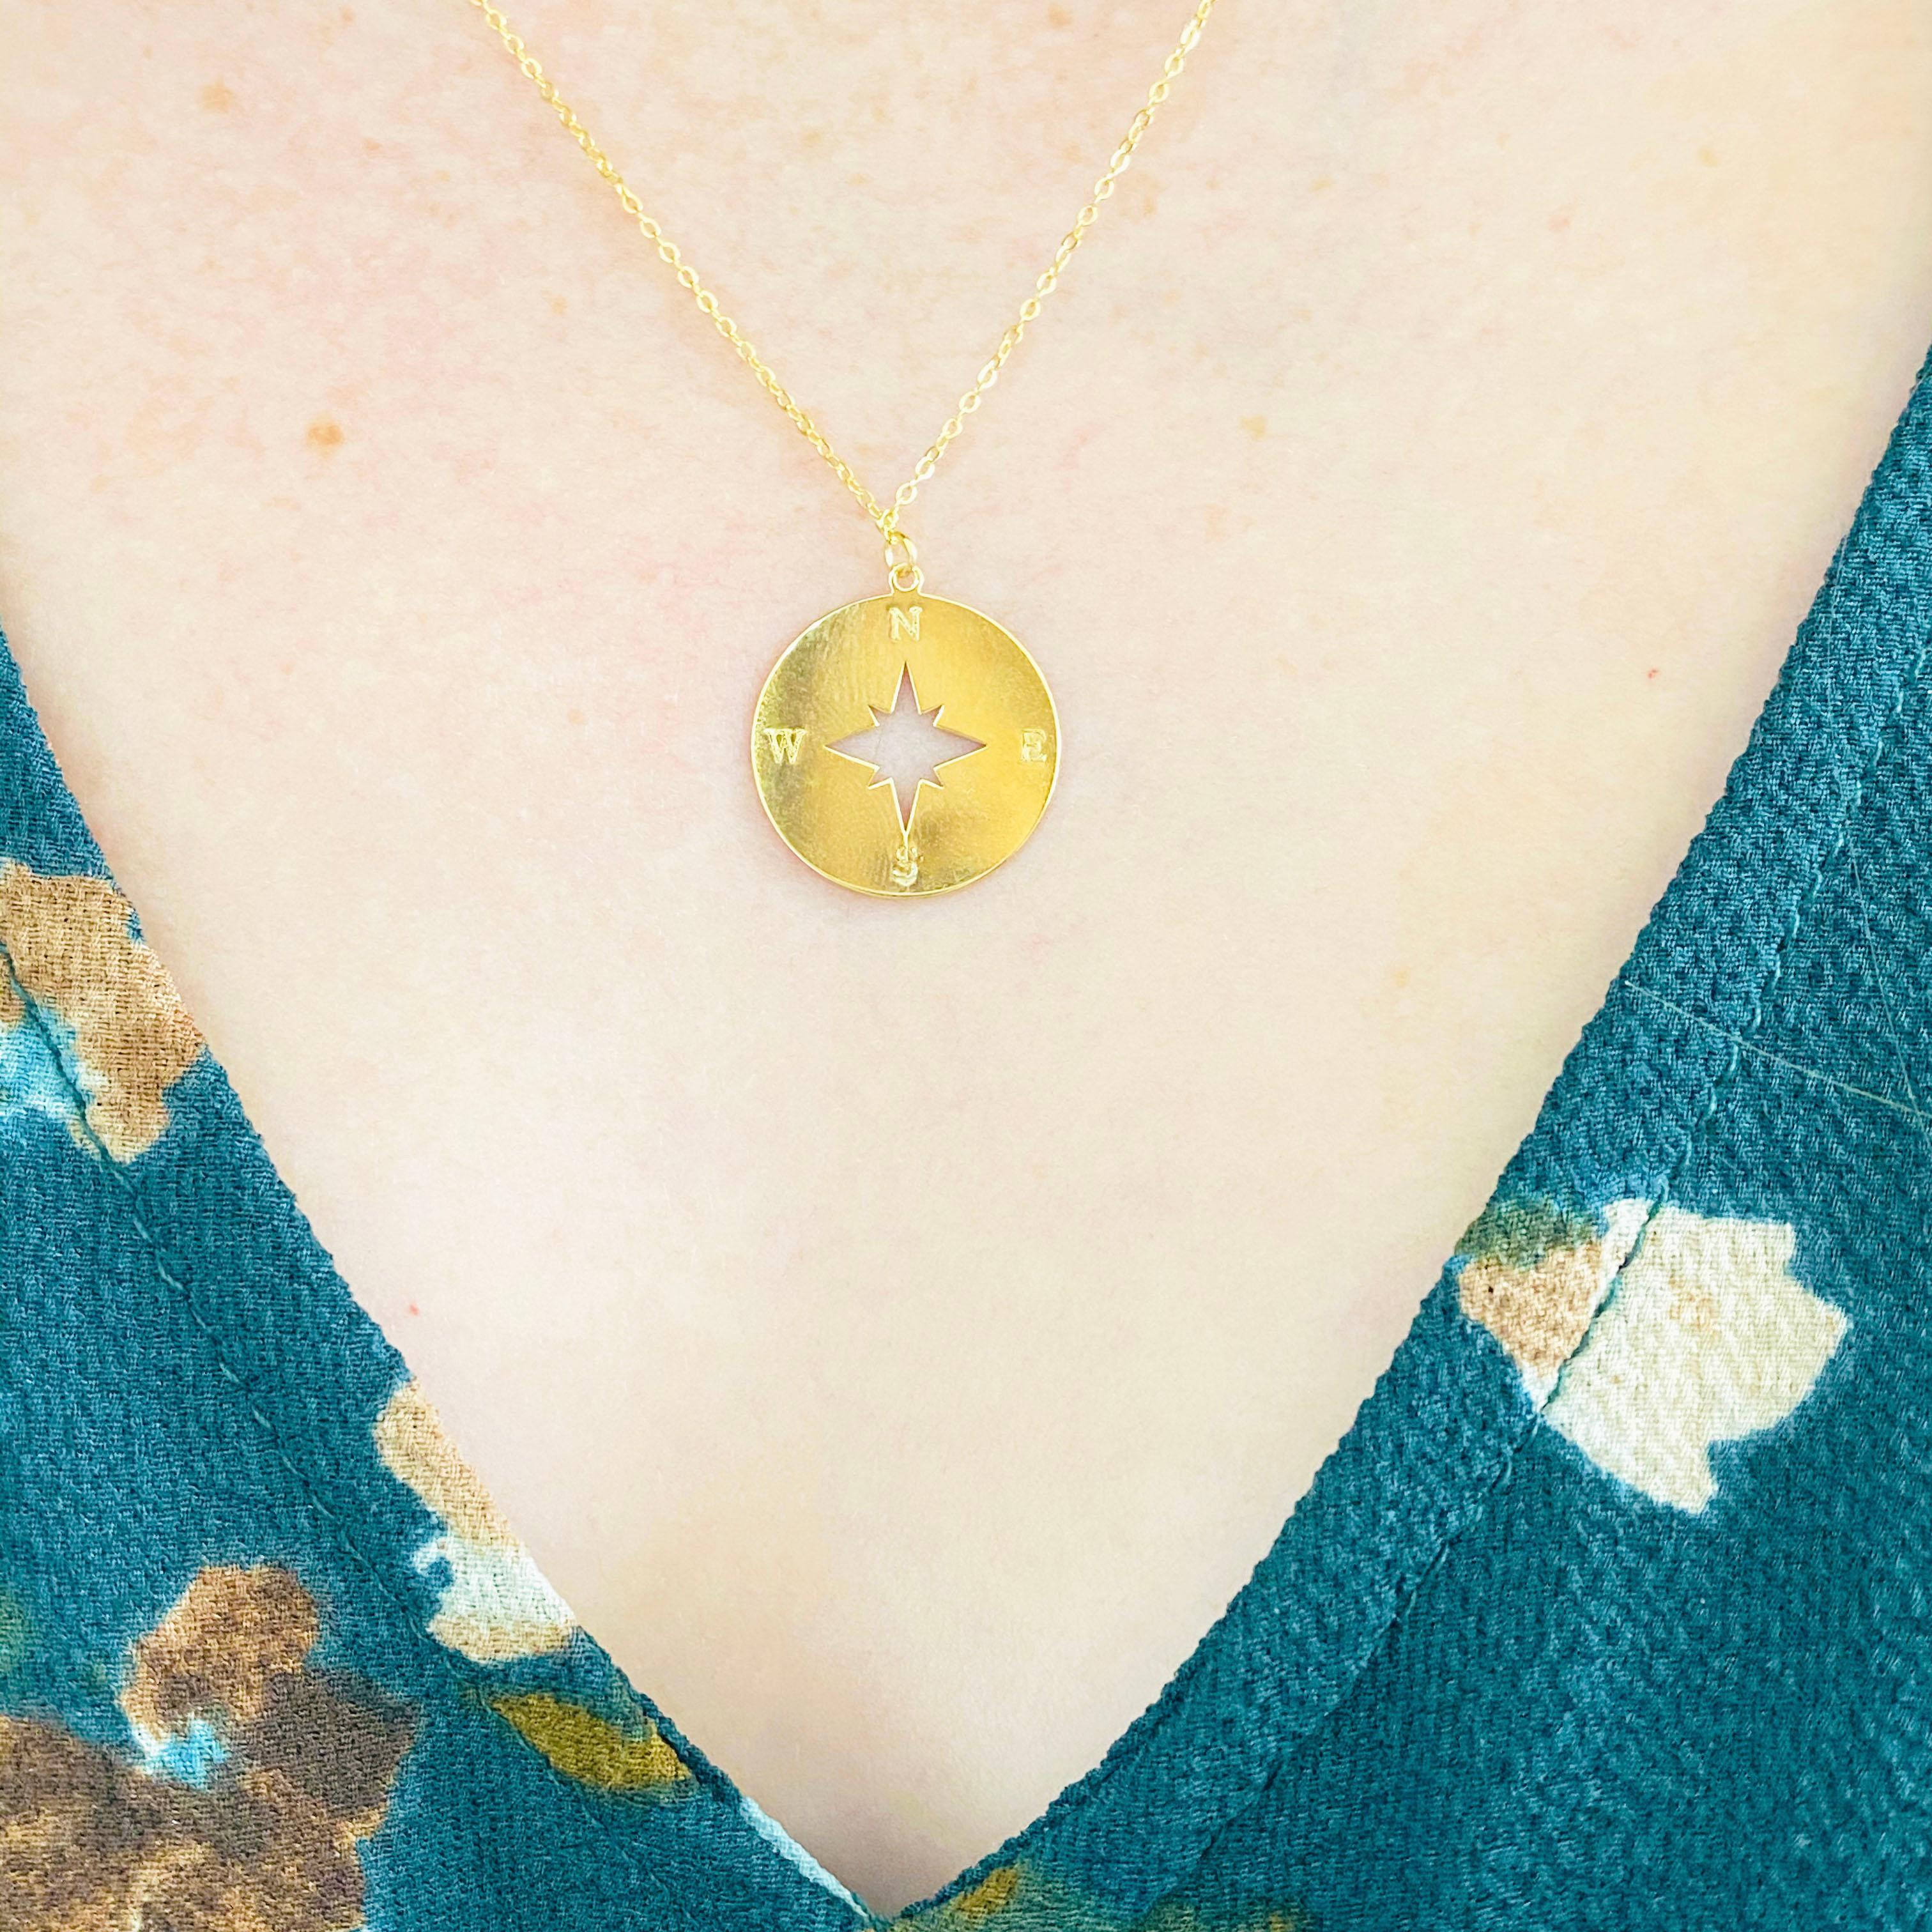 This gorgeous 14k yellow gold compass pendant is the perfect mix between classic and trendy! This necklace represents a compass, symbolizing encouragement and guidance for the journey ahead. A woman needs to 